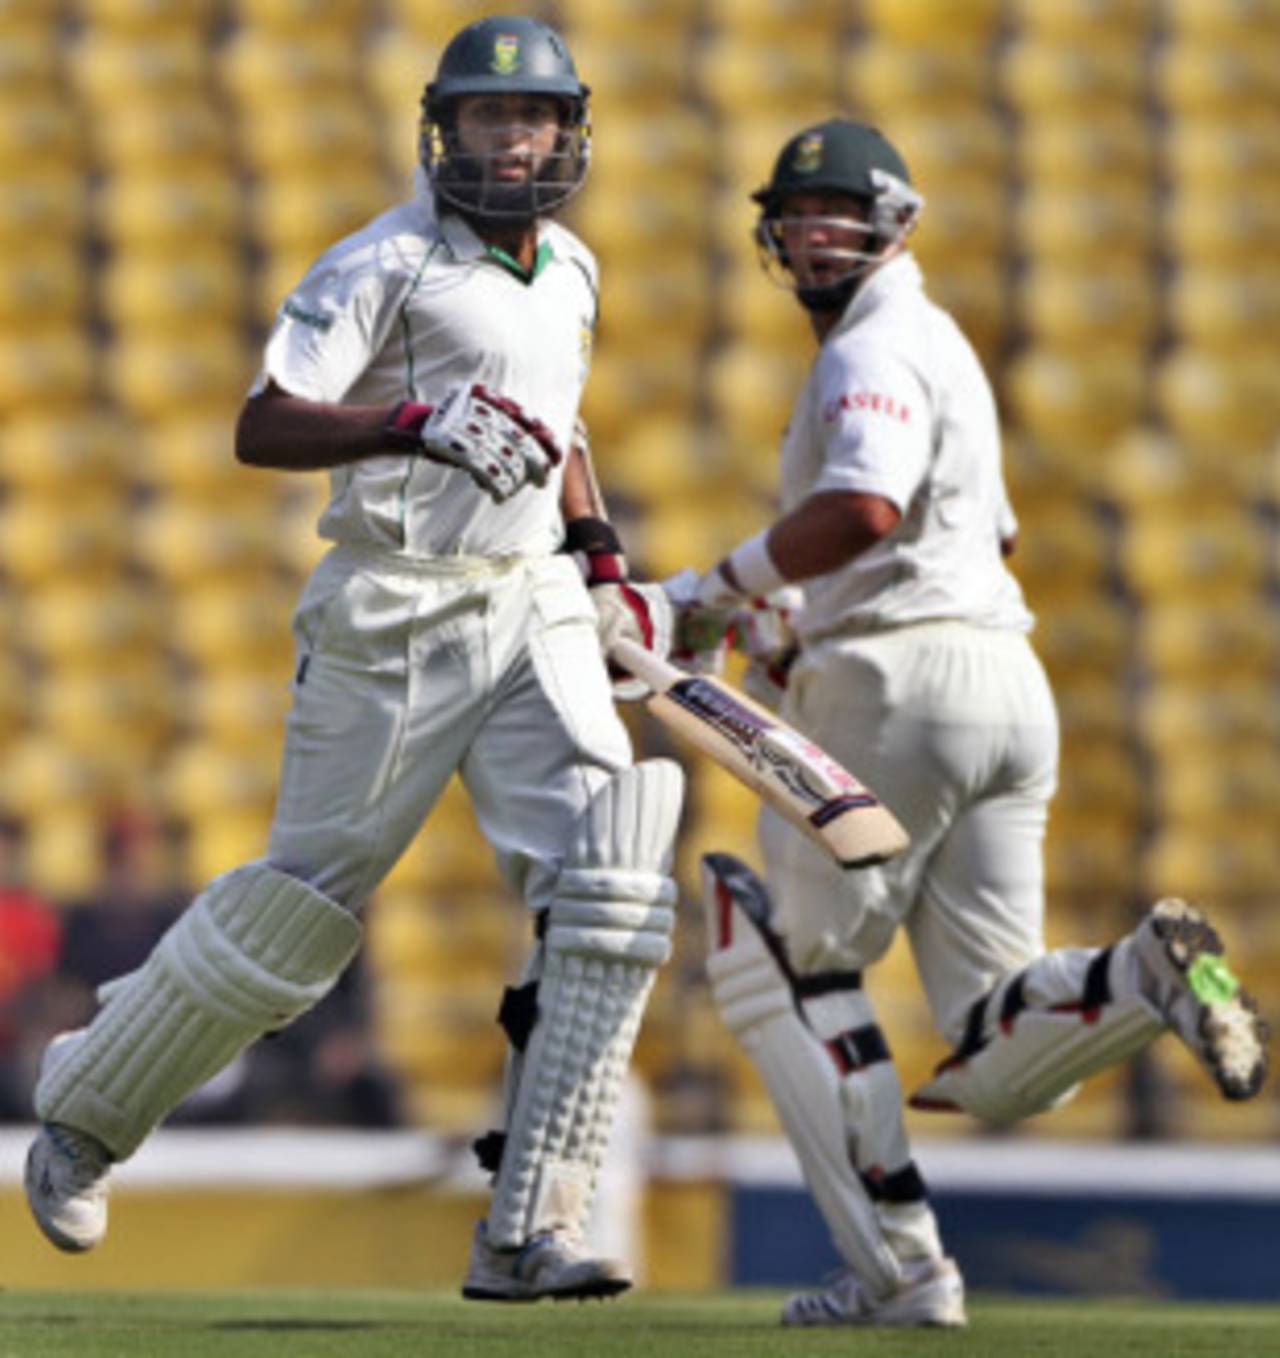 Hashim Amla and Jacques Kallis run between the wickets during their record stand, India v South Africa, 1st Test, Nagpur, 1st day, February 6, 2010